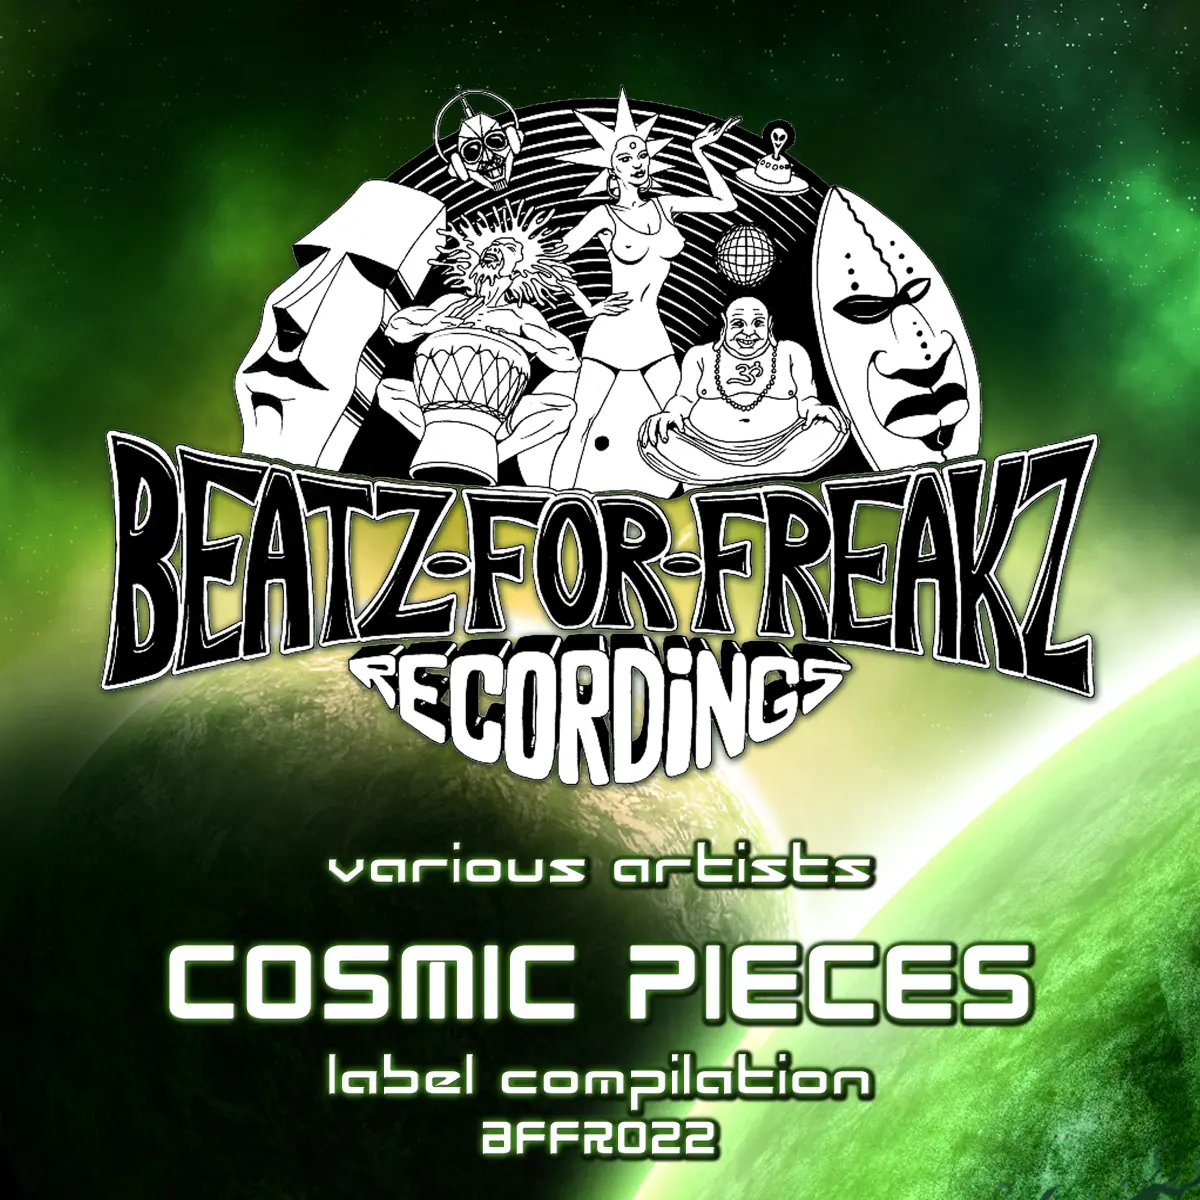 BFFR022 - Various Artists - Cosmic Pieces